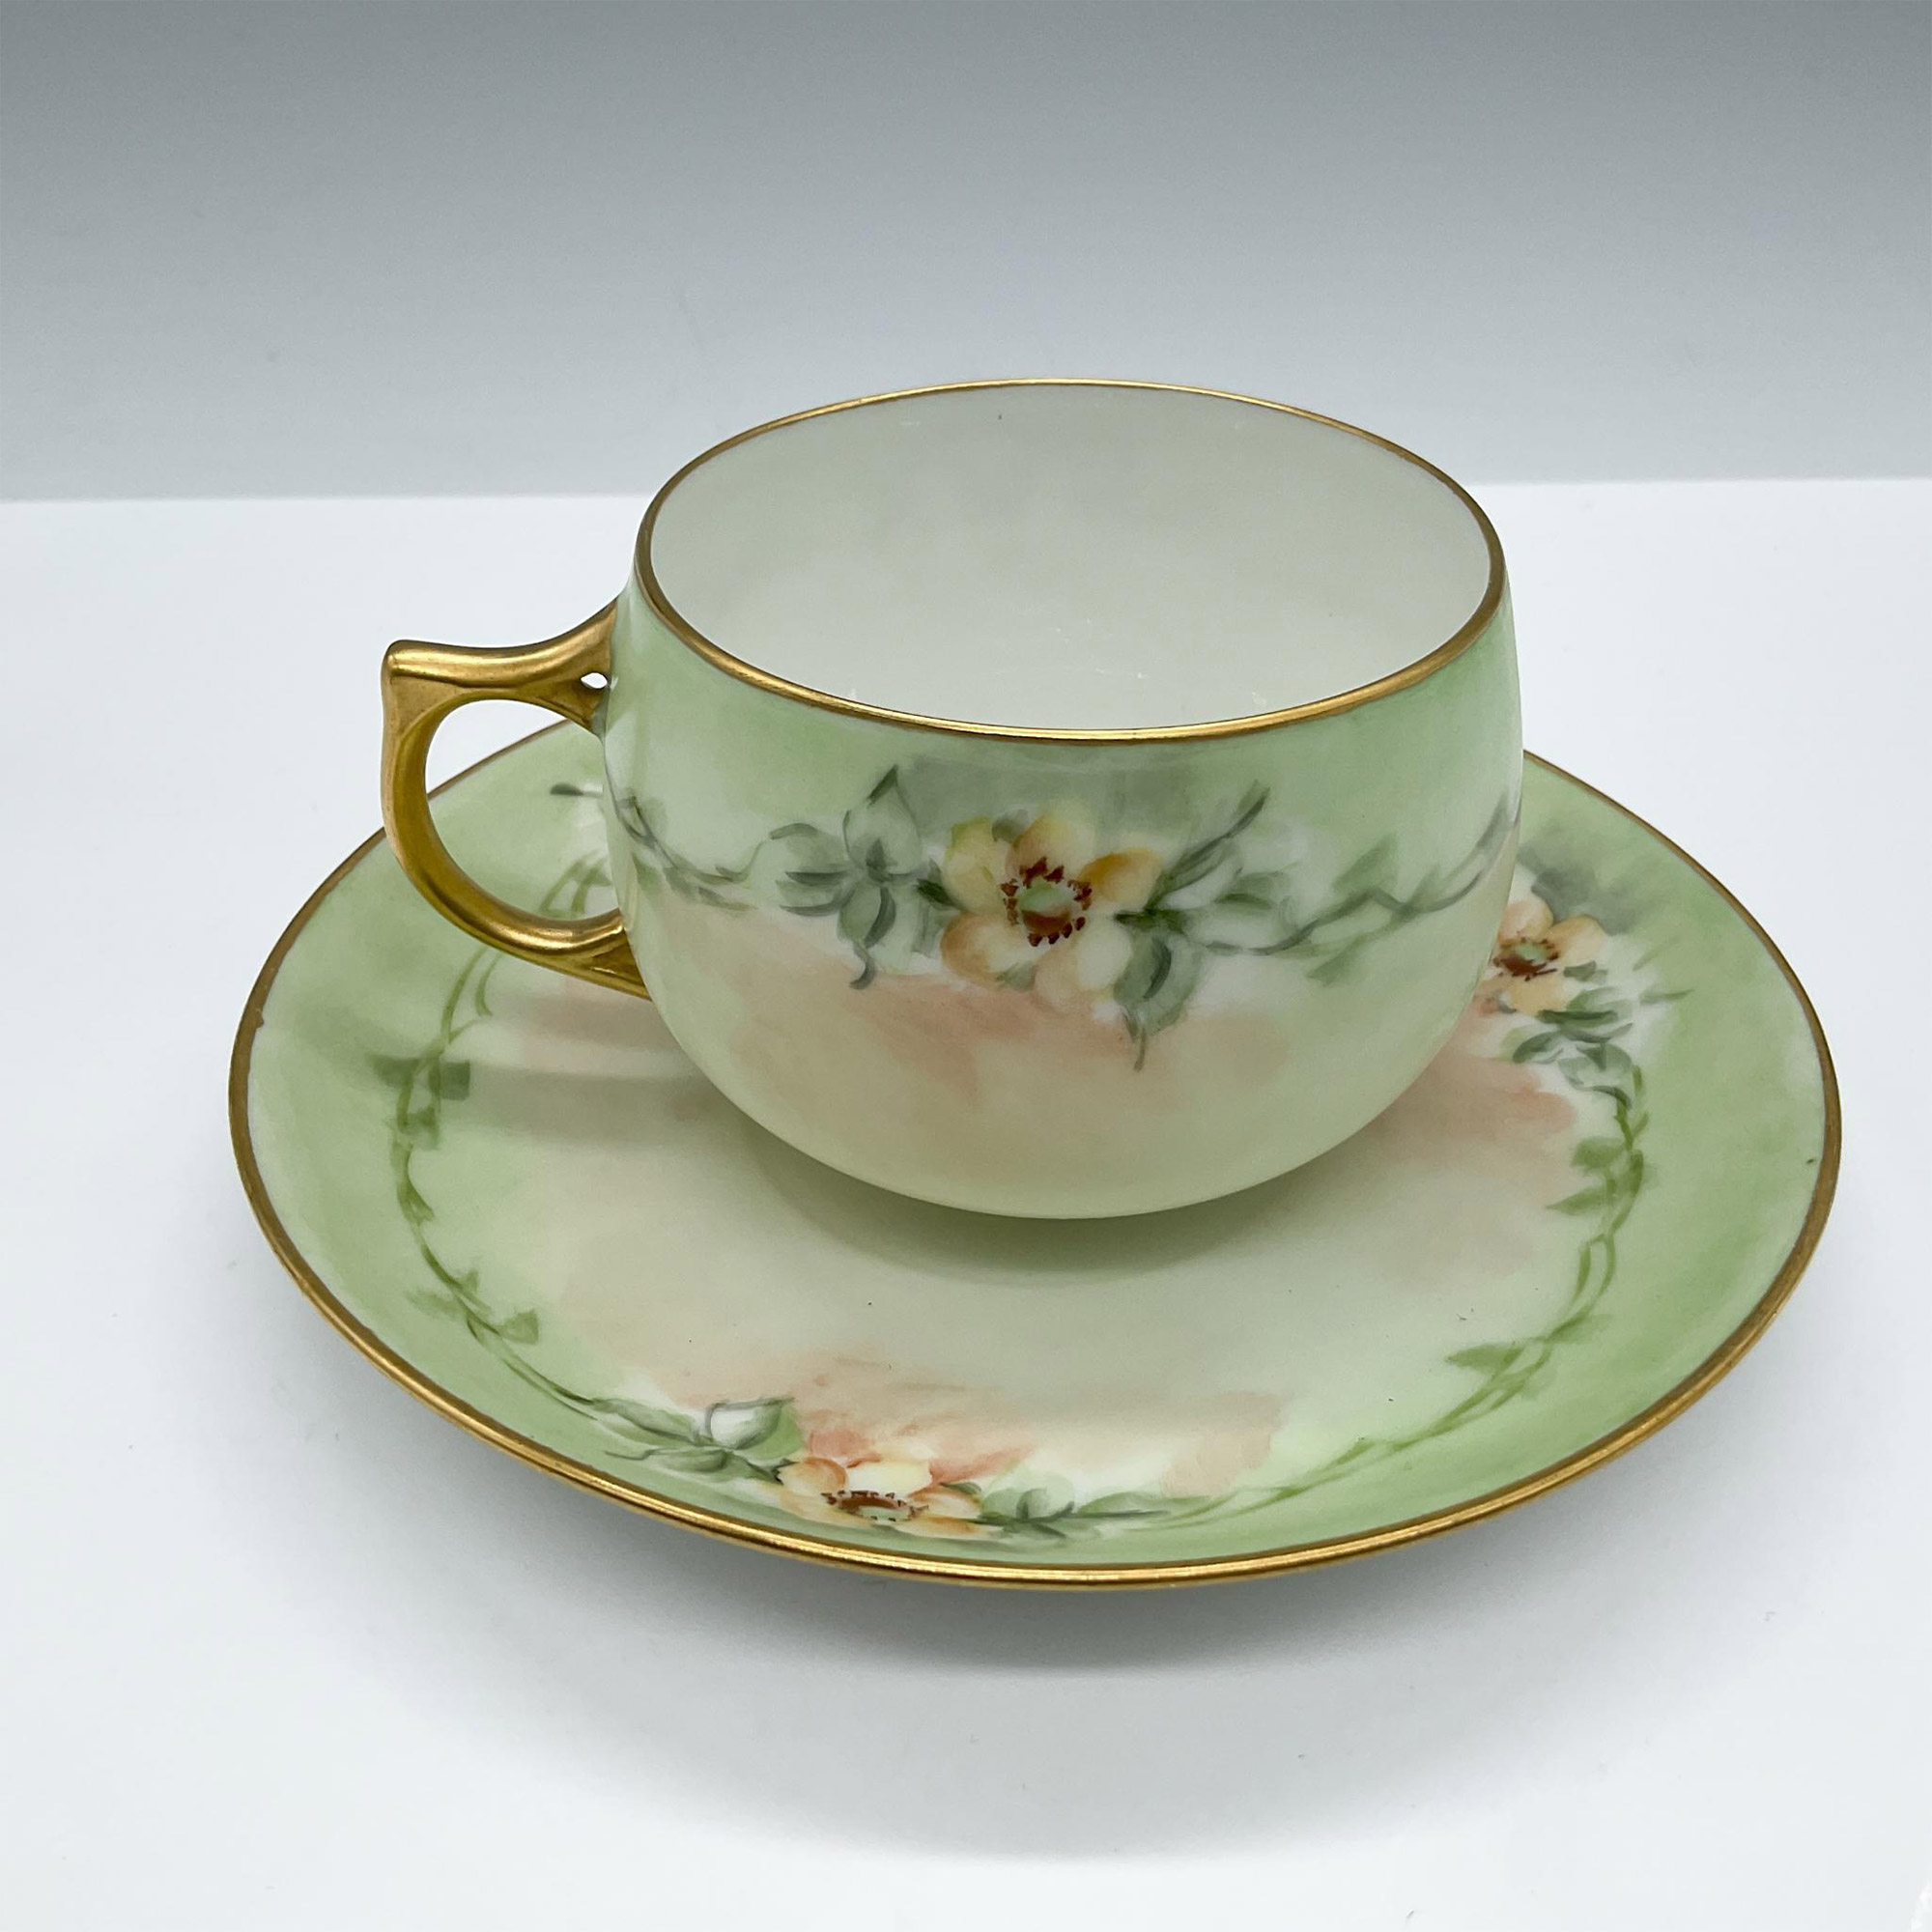 Bavaria Bone China Tea Cup and Saucer, Green Floral - Image 2 of 4